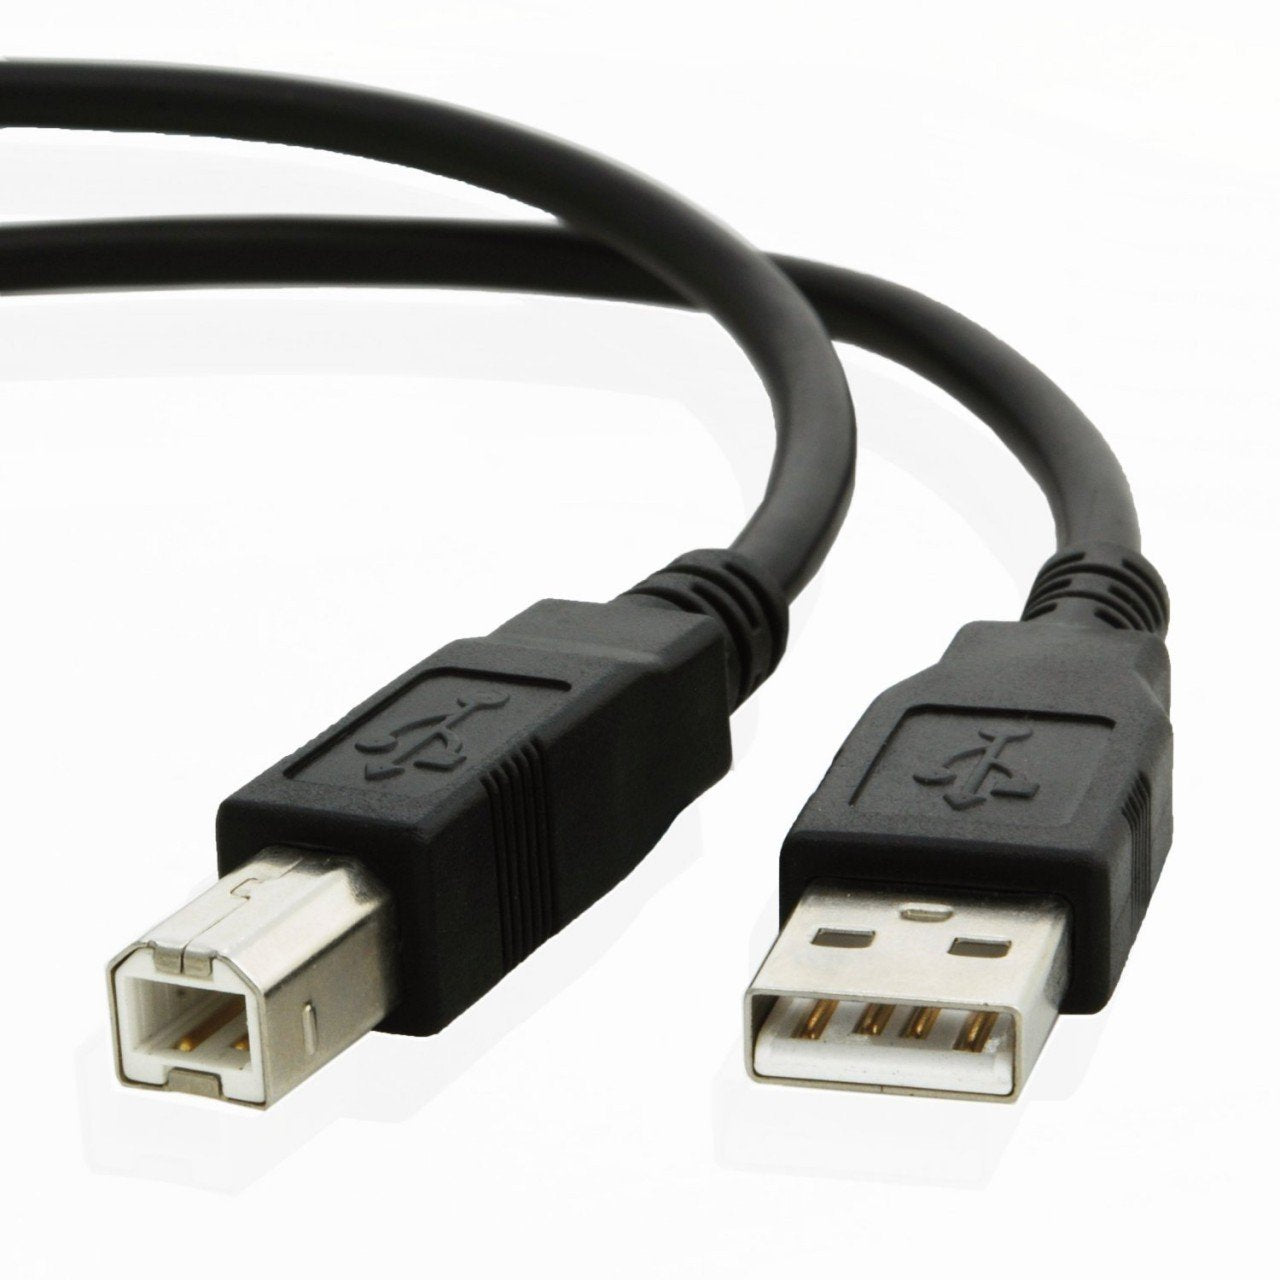 USB cable for Canon PIXMA MG2920